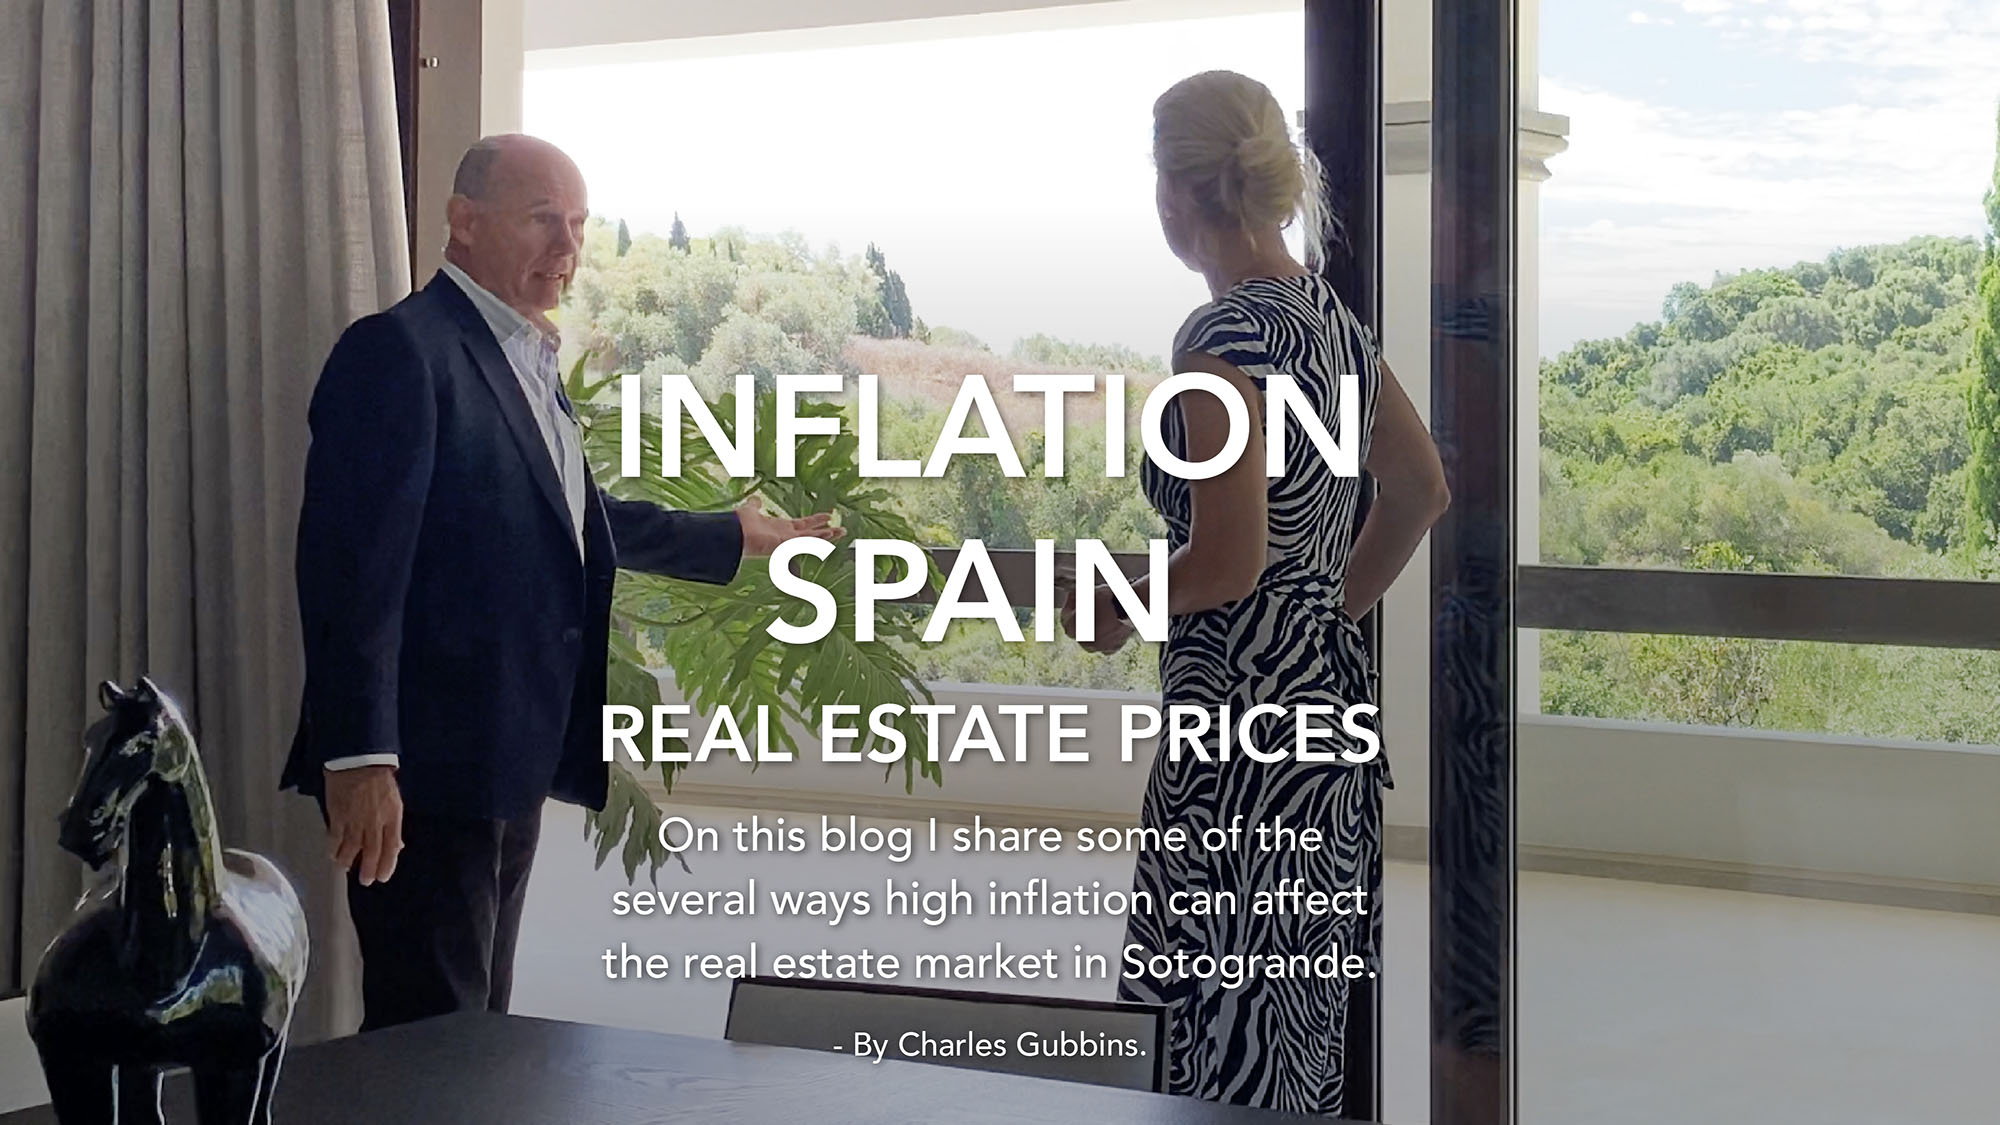 Inflation and real estate prices Sotogrande Spain